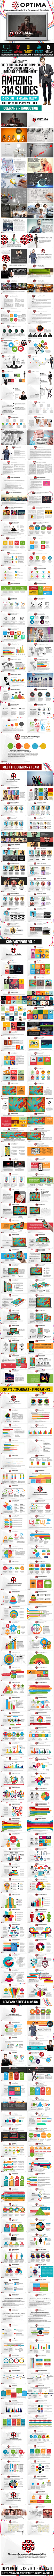 Optima Business and Marketing Powerpoint Template